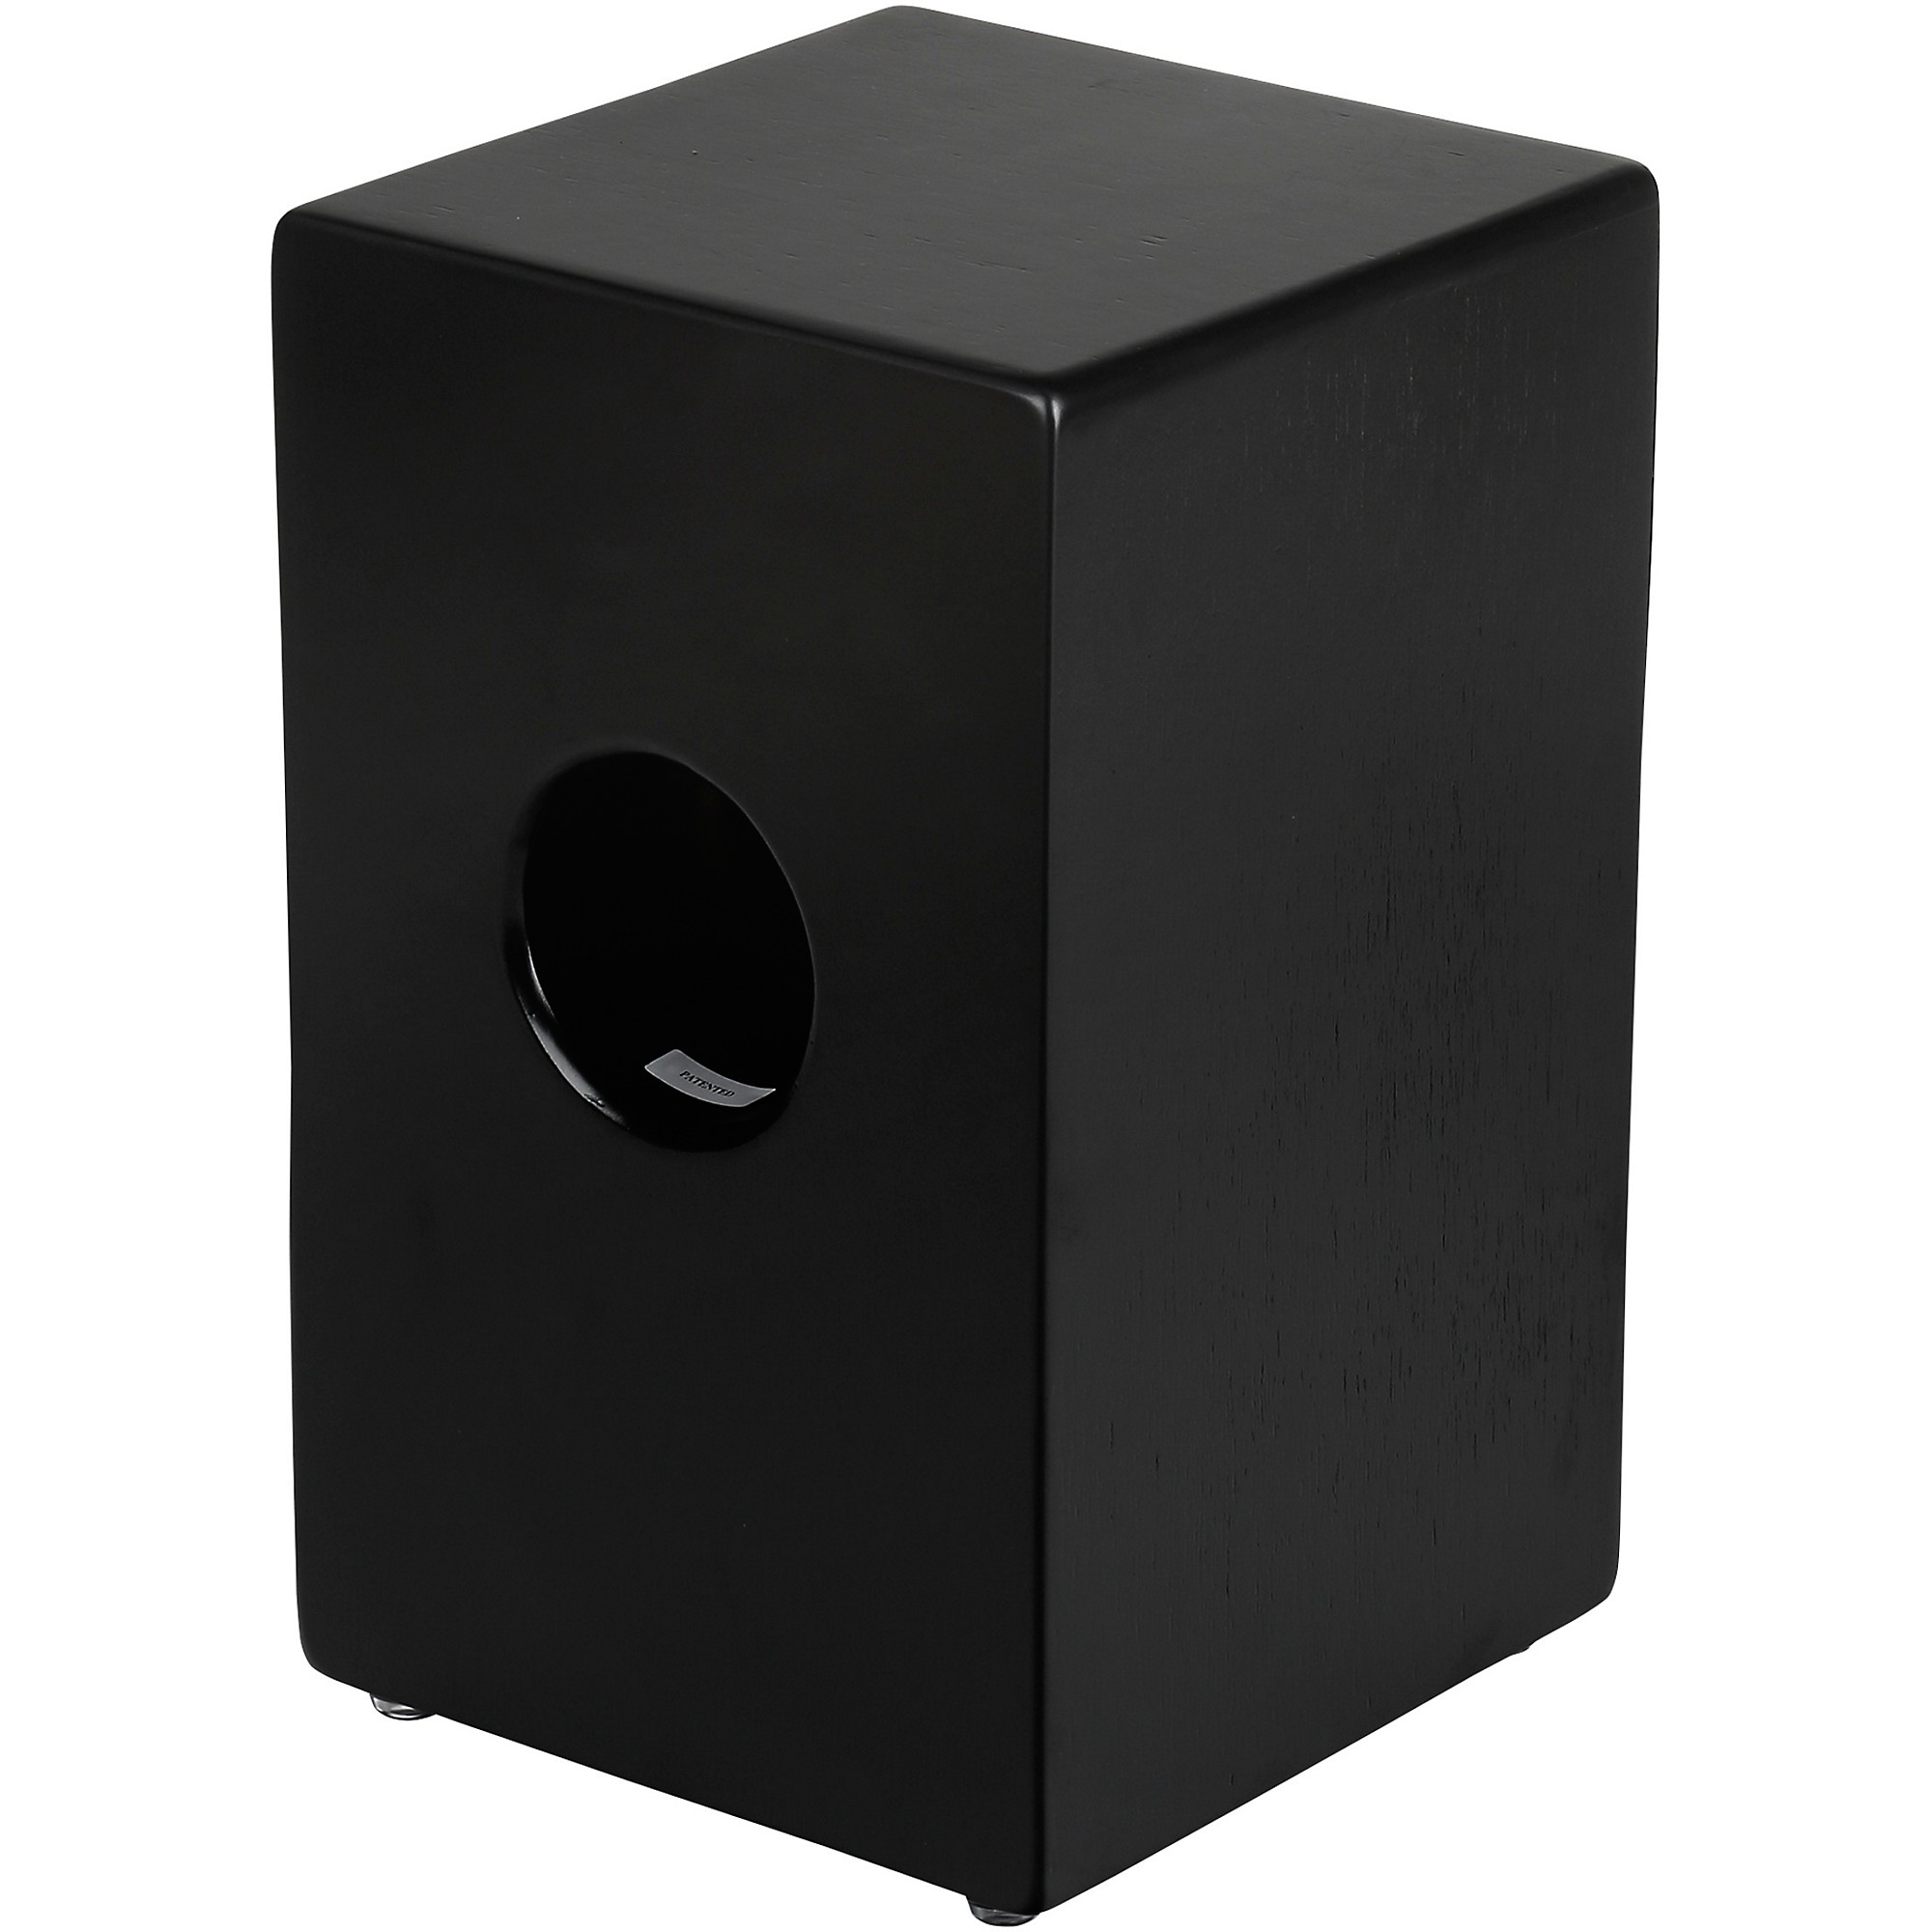 Dress Up Your Cajon Drum with Accessories - X8 Drums & Percussion, Inc